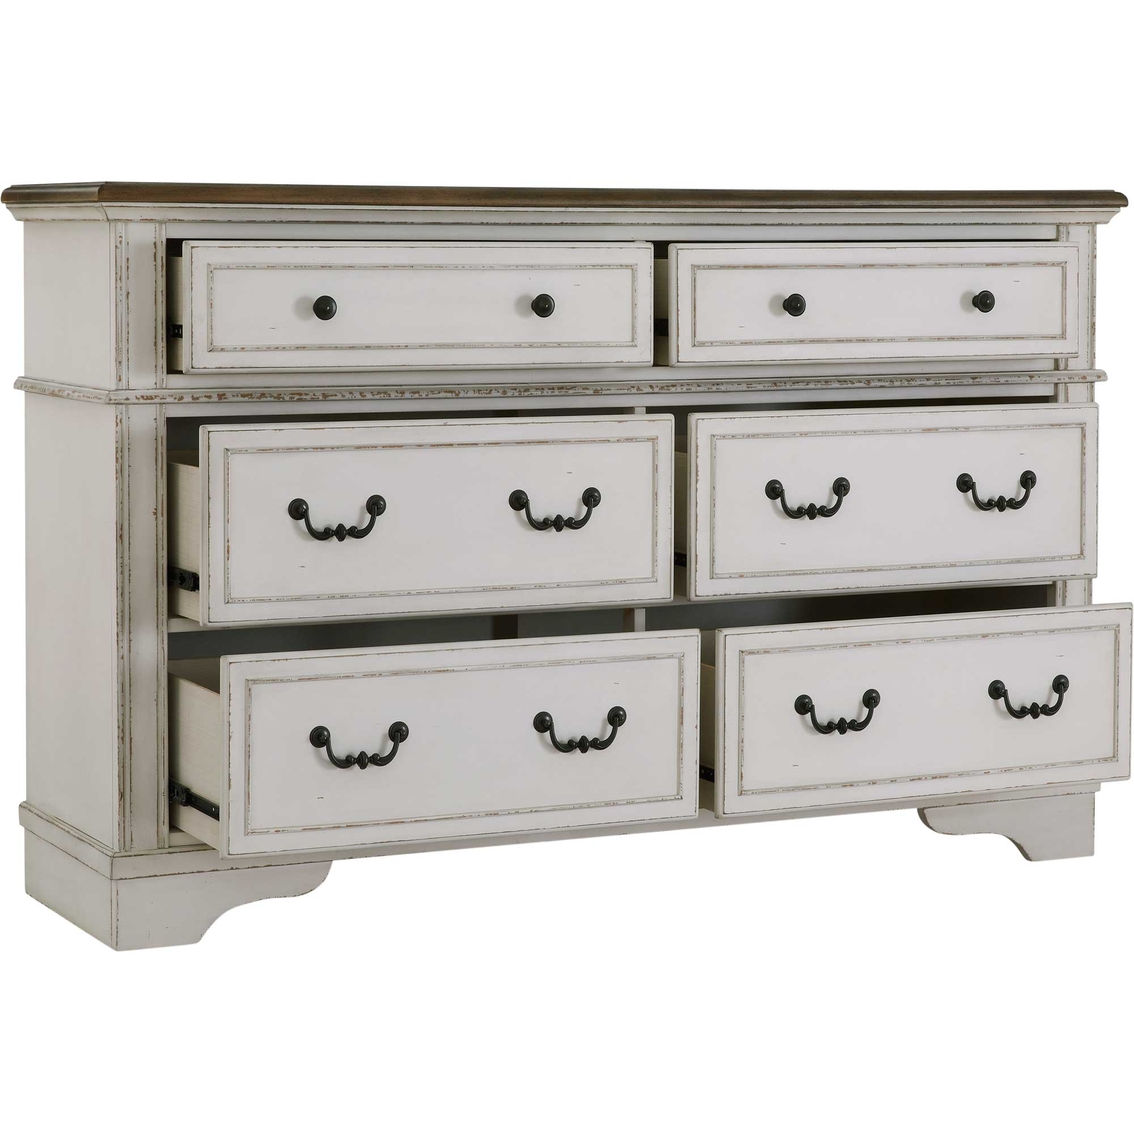 Signature Design by Ashley Brollyn Dresser - Image 3 of 6